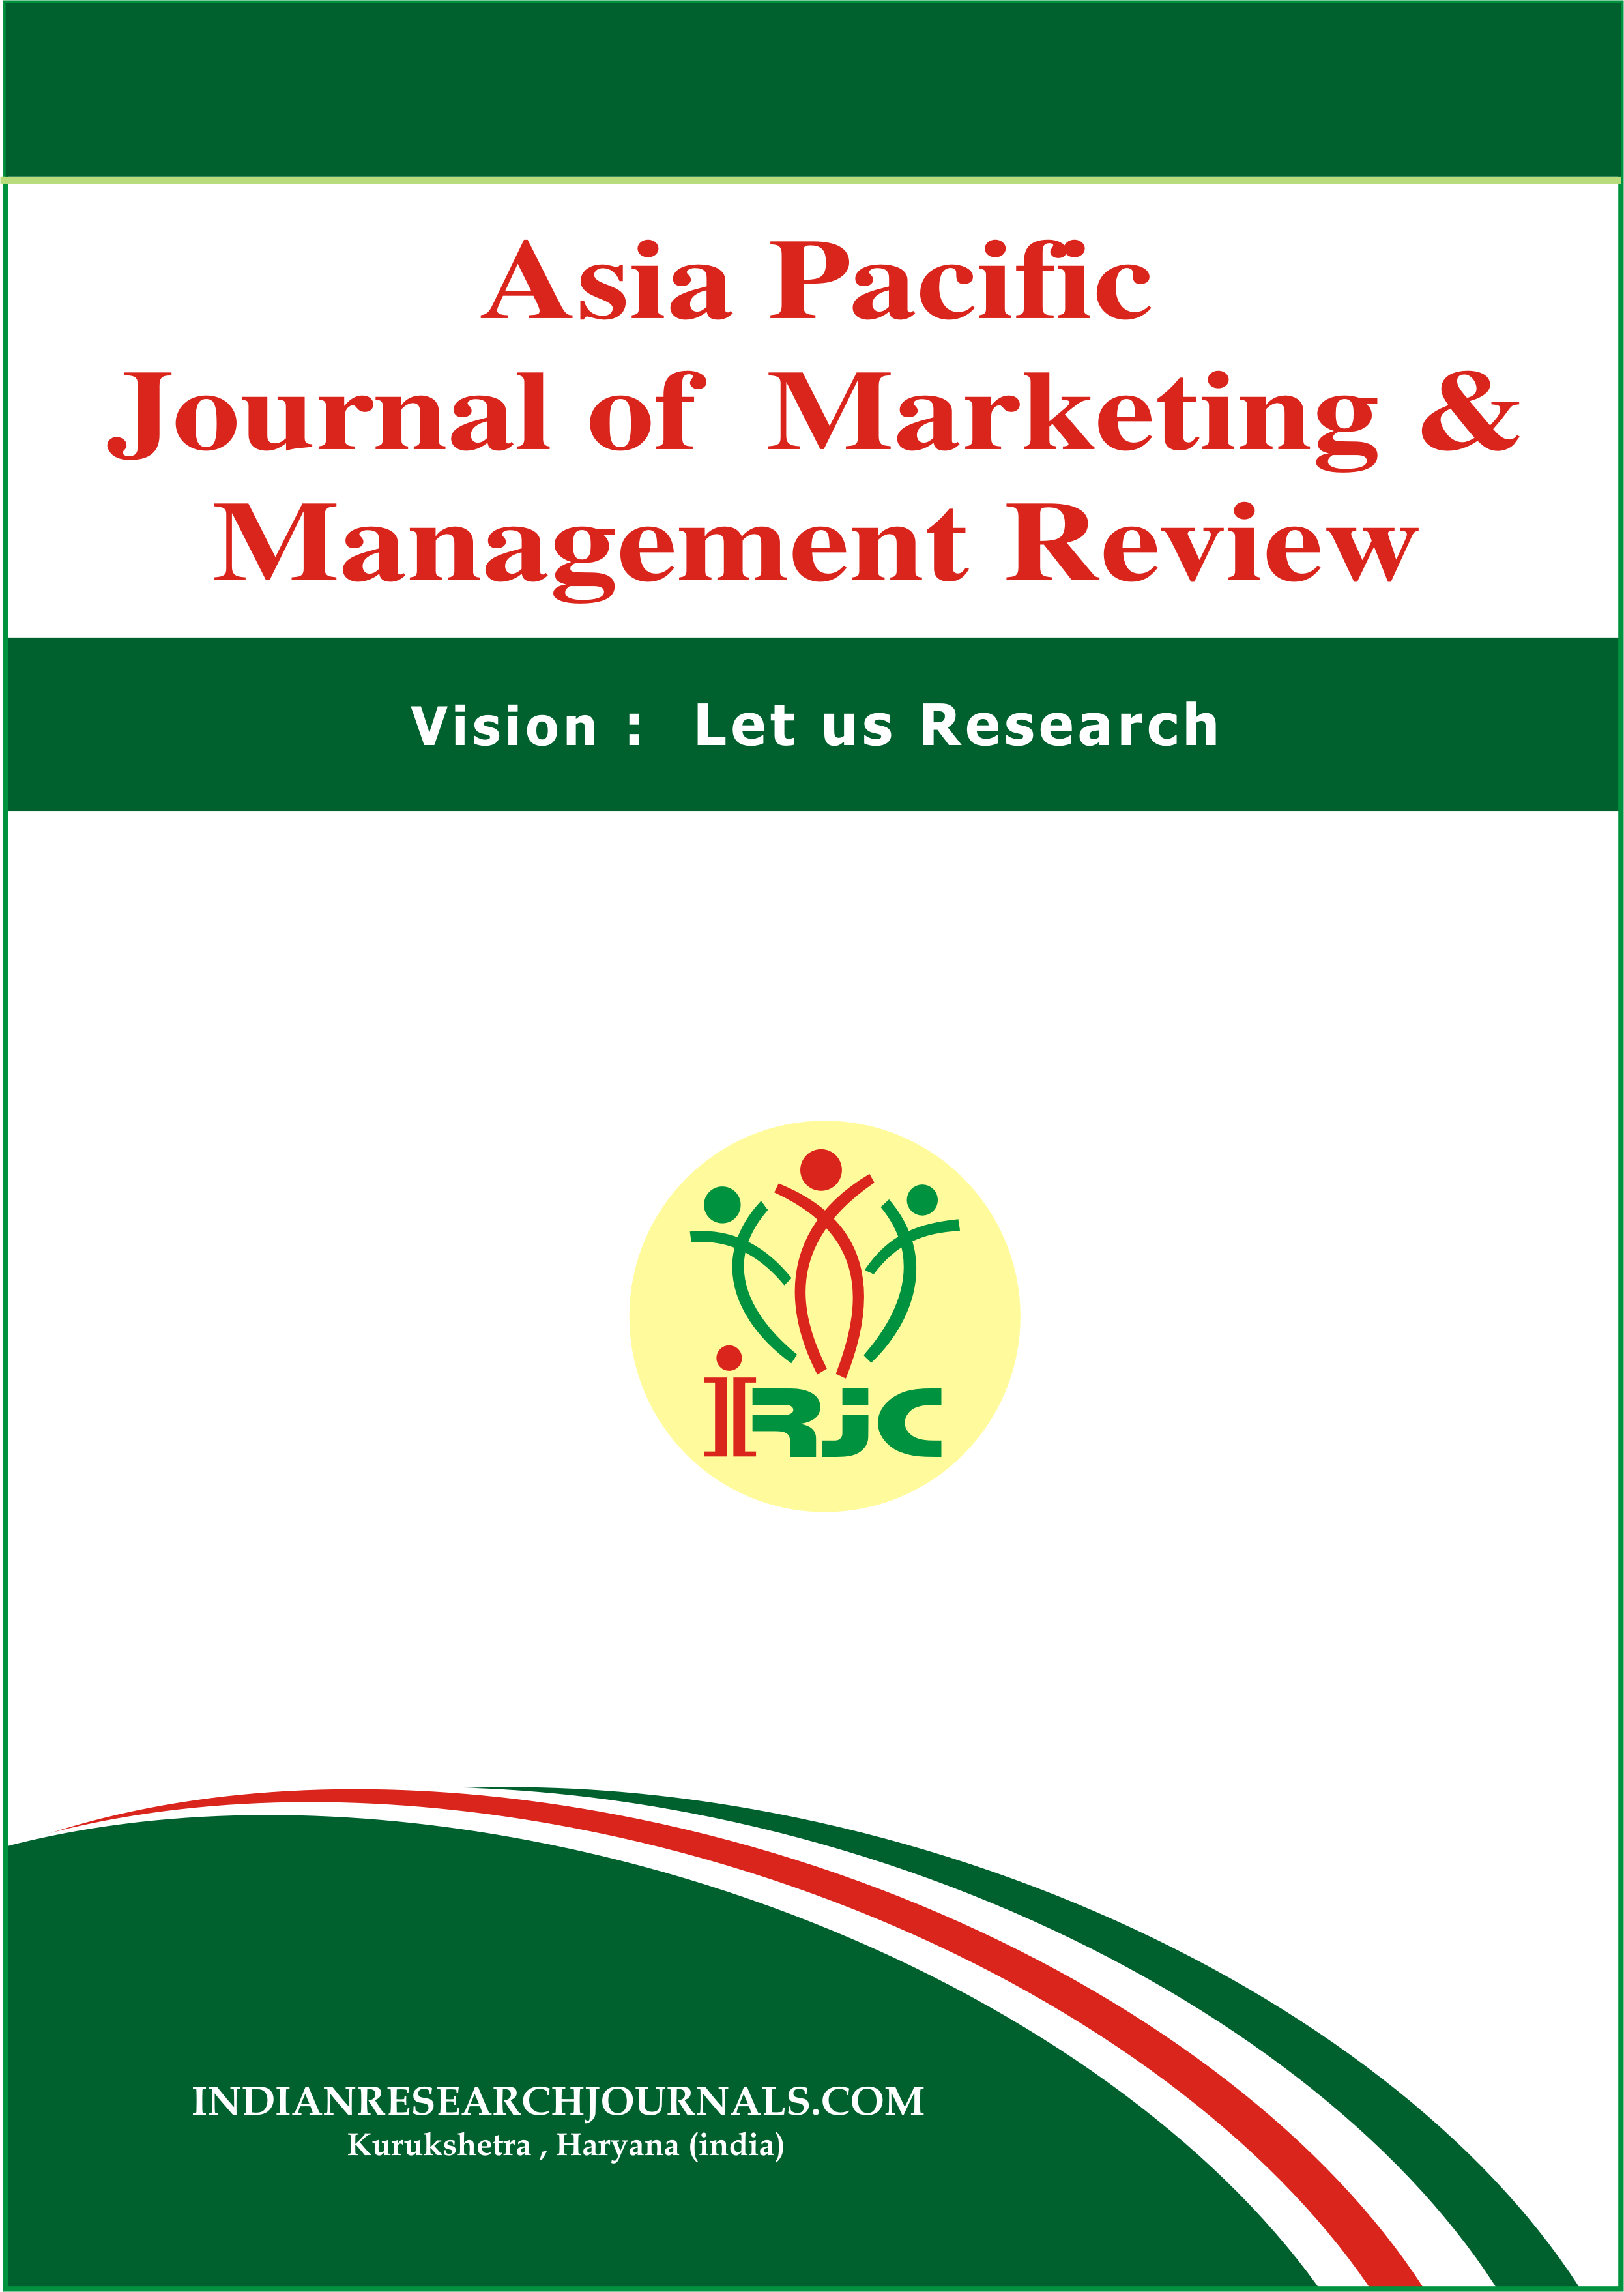 					View Vol. 12 No. 05 (2023): ASIA PACIFIC JOURNAL OF MARKETING & MANAGEMENT REVIEW
				